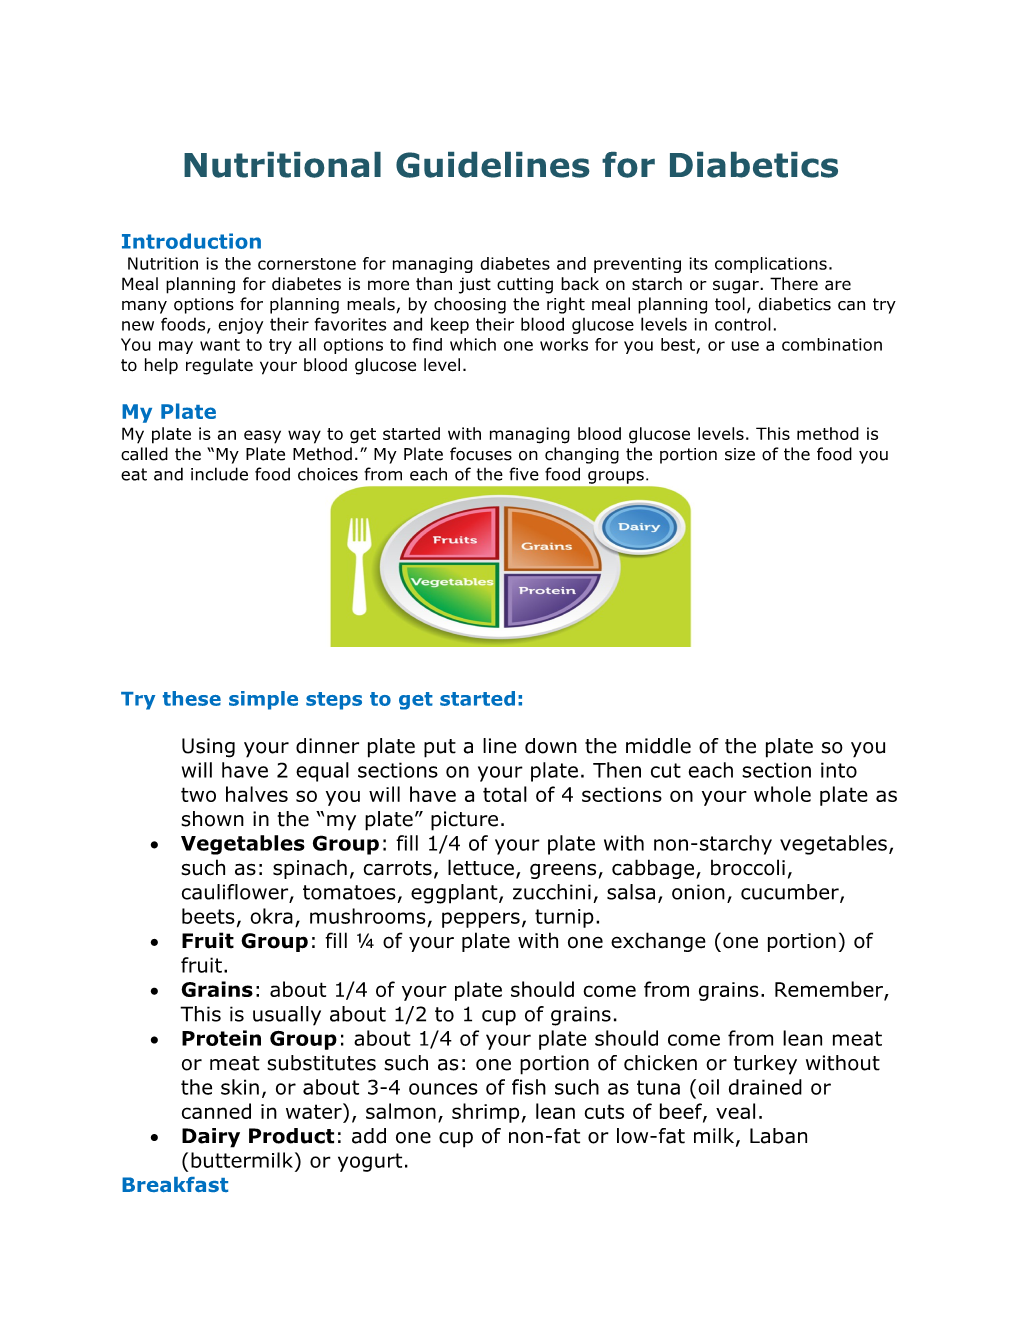 Nutritional Guidelines for Diabetics